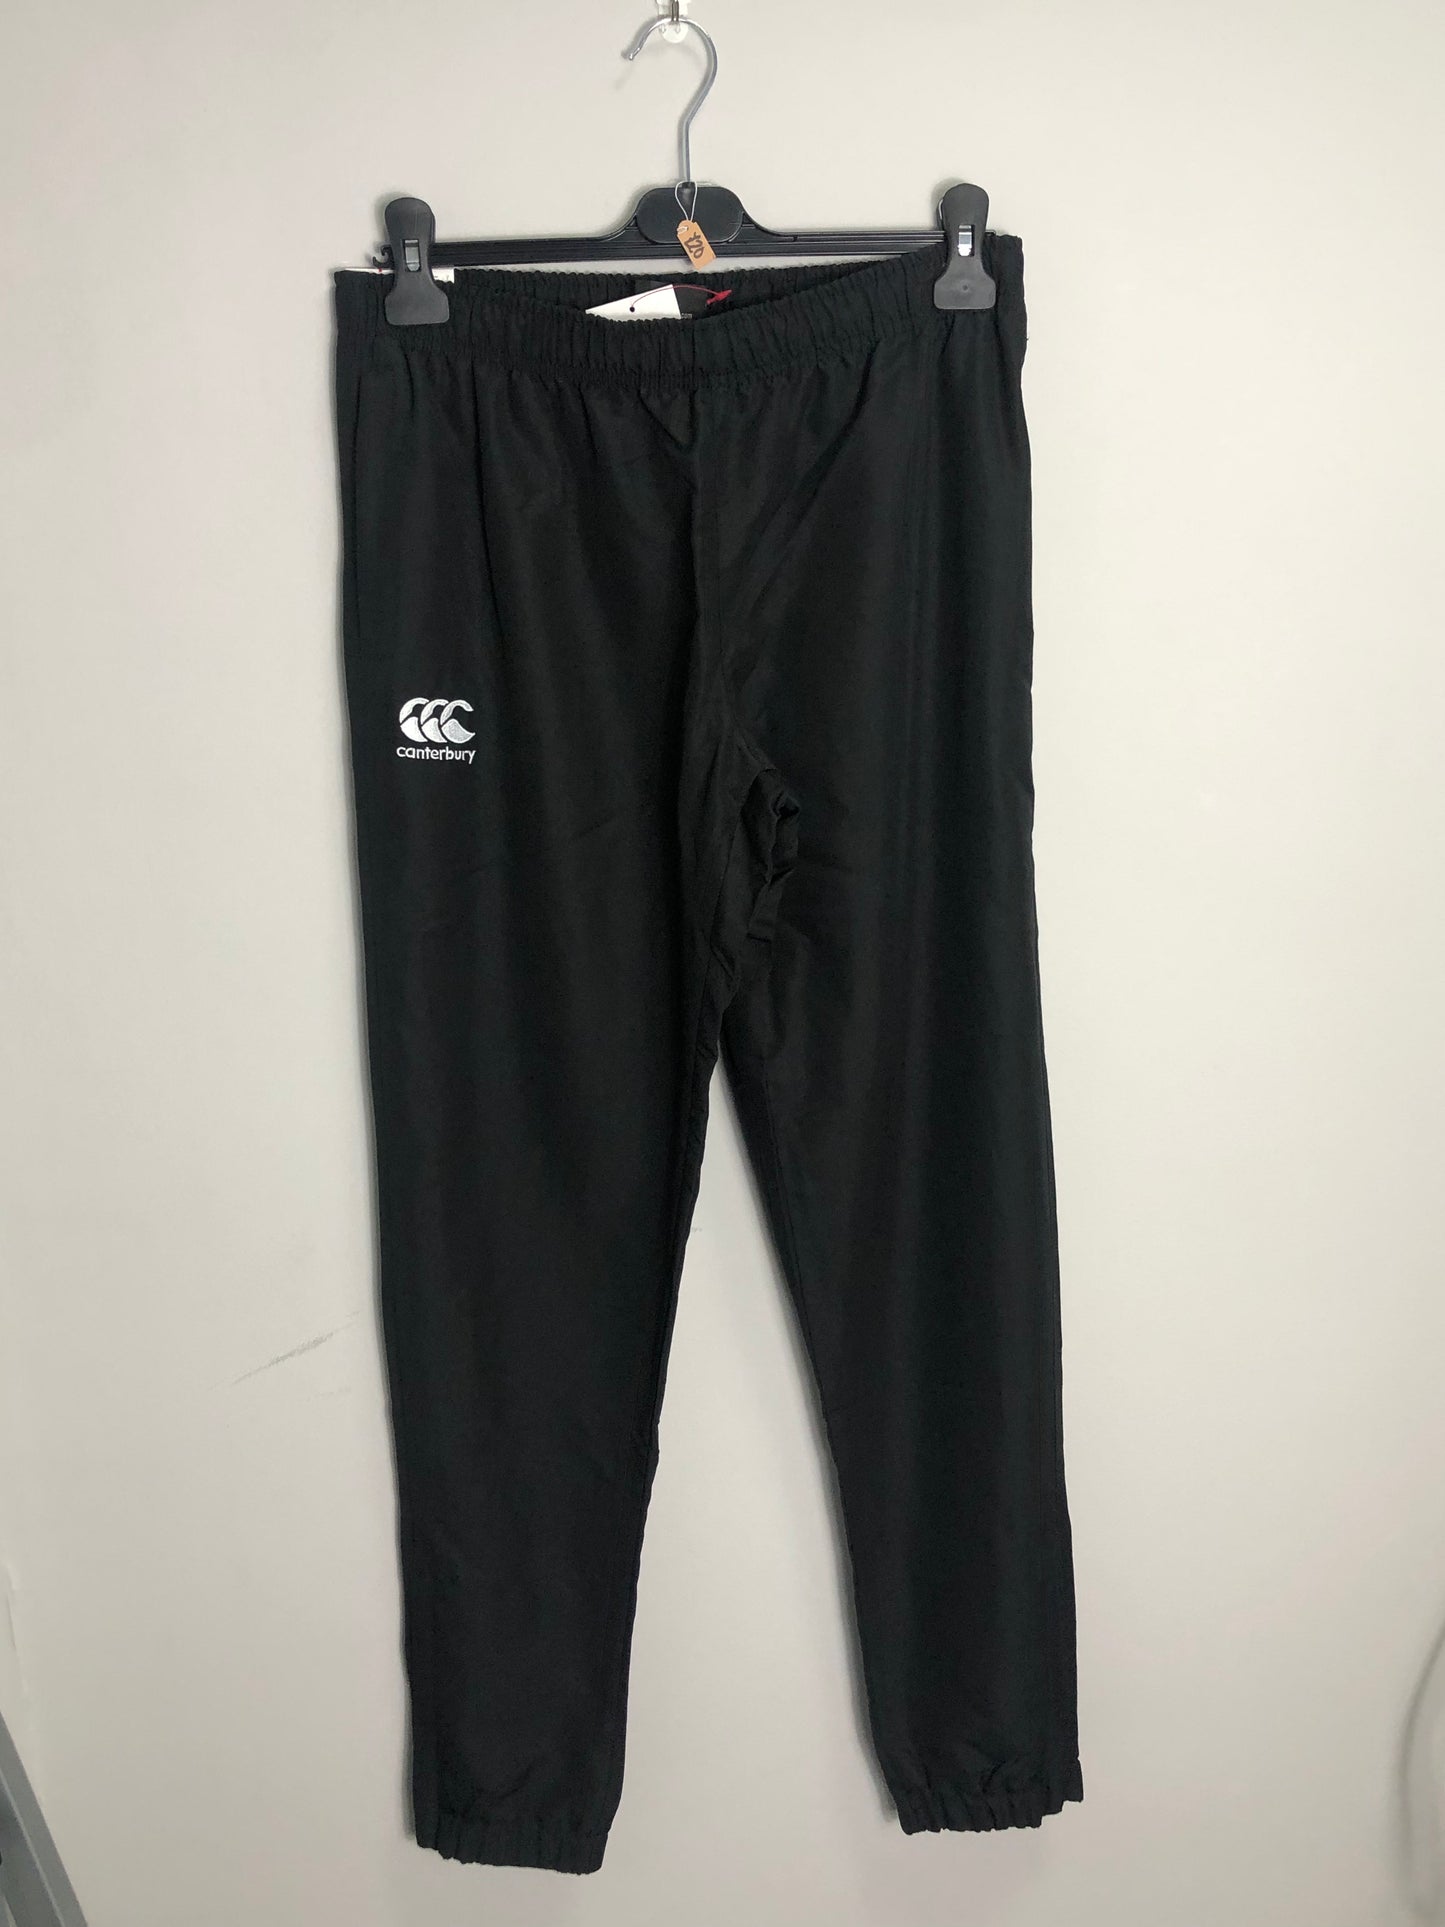 Canterbury Womens Size 10 Taped Tracksuit Bottoms